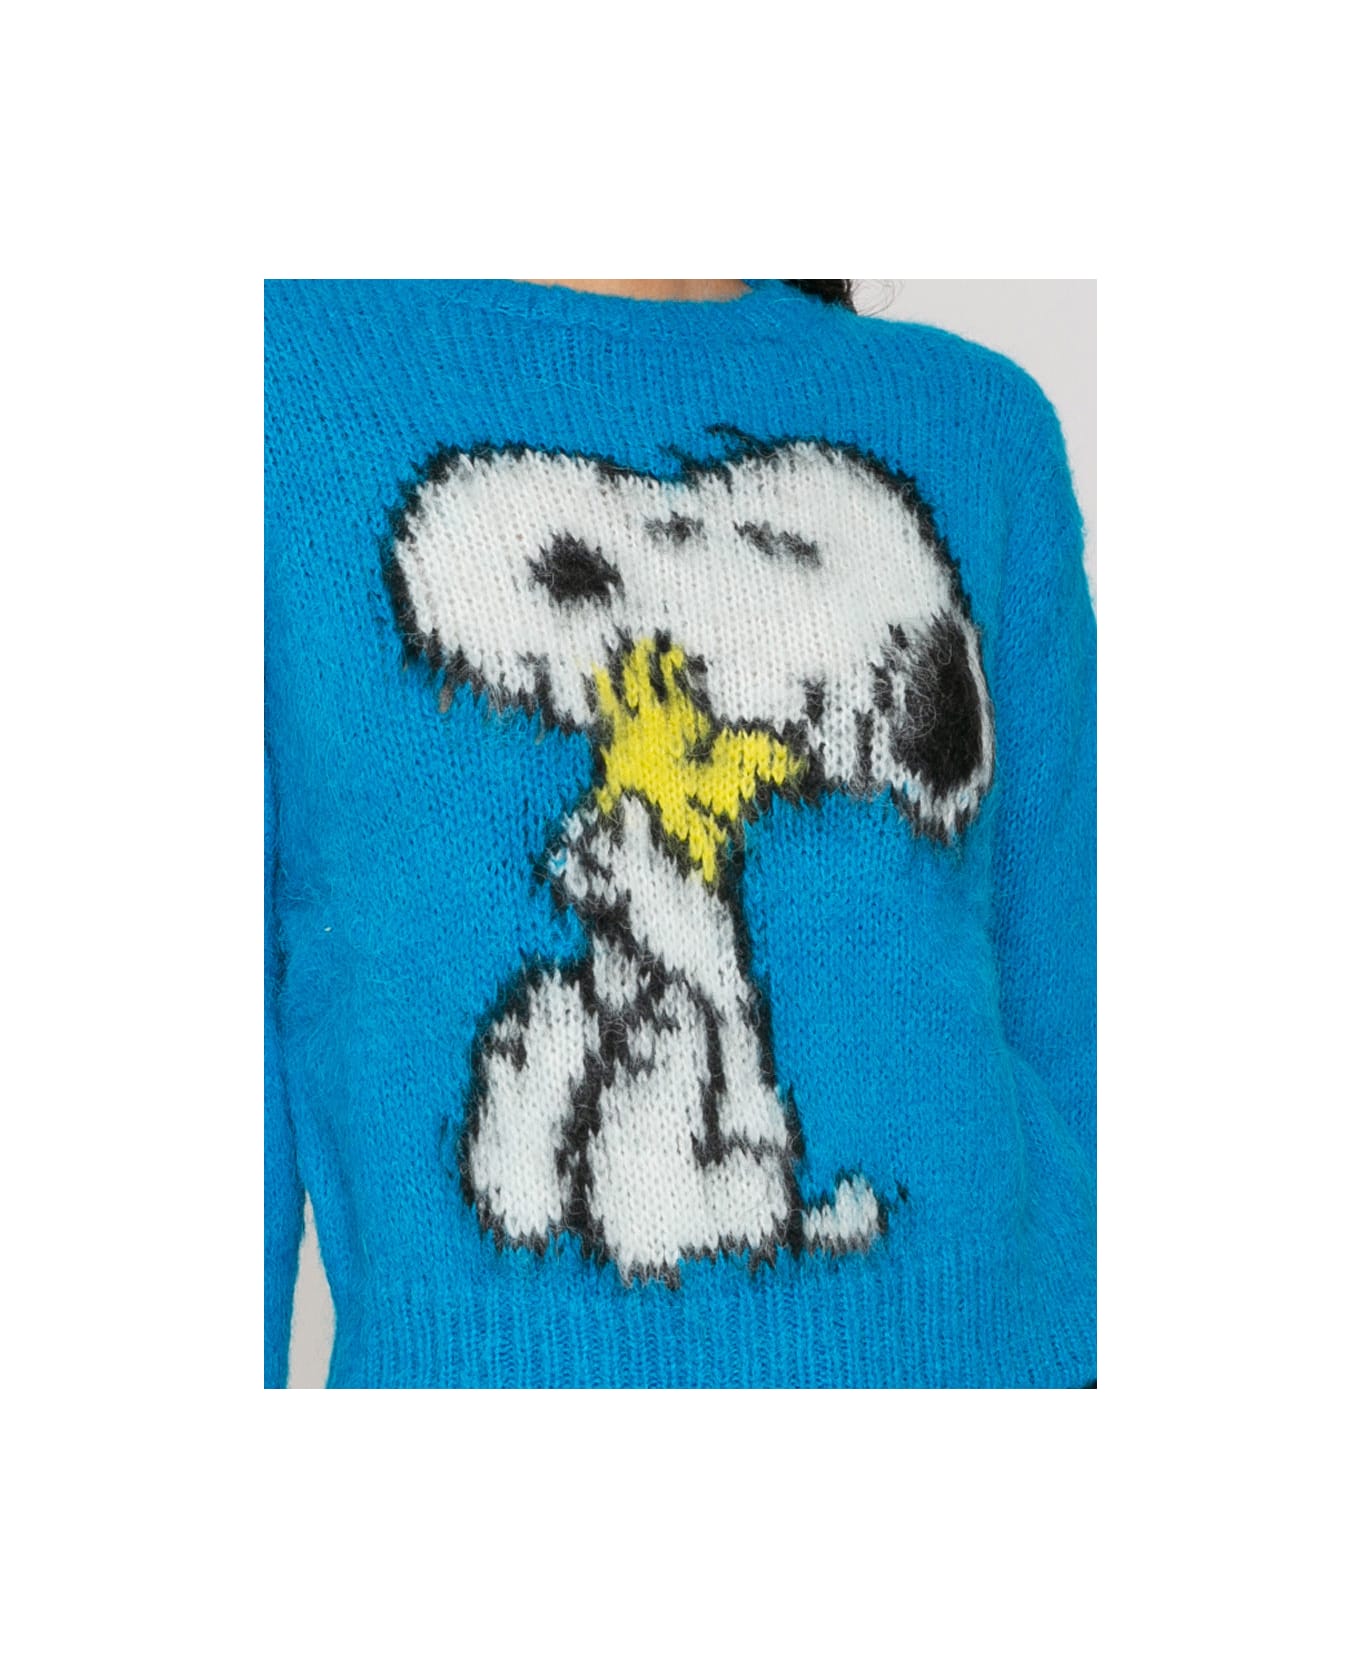 MC2 Saint Barth Woman Brushed Sweater With Snoopy Print | Snoopy - Peanuts Special Edition - BLUE ニットウェア